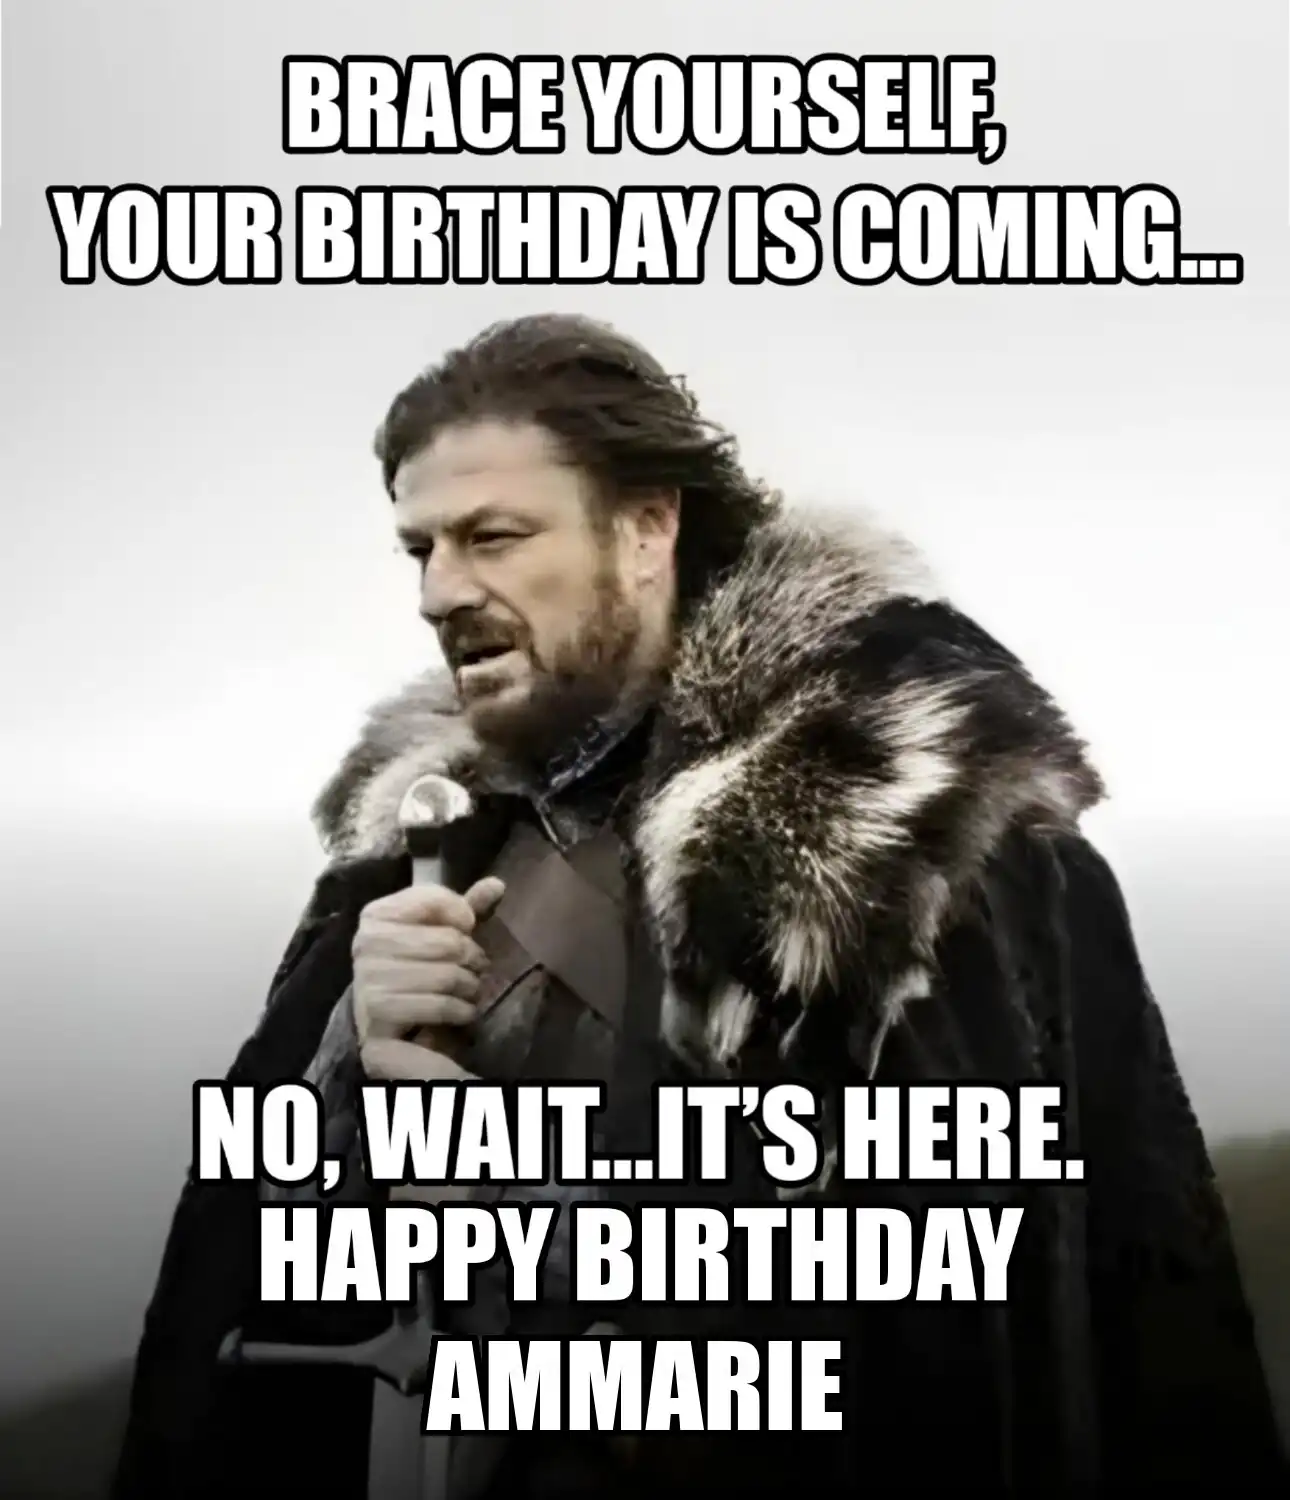 Happy Birthday Ammarie Brace Yourself Your Birthday Is Coming Meme